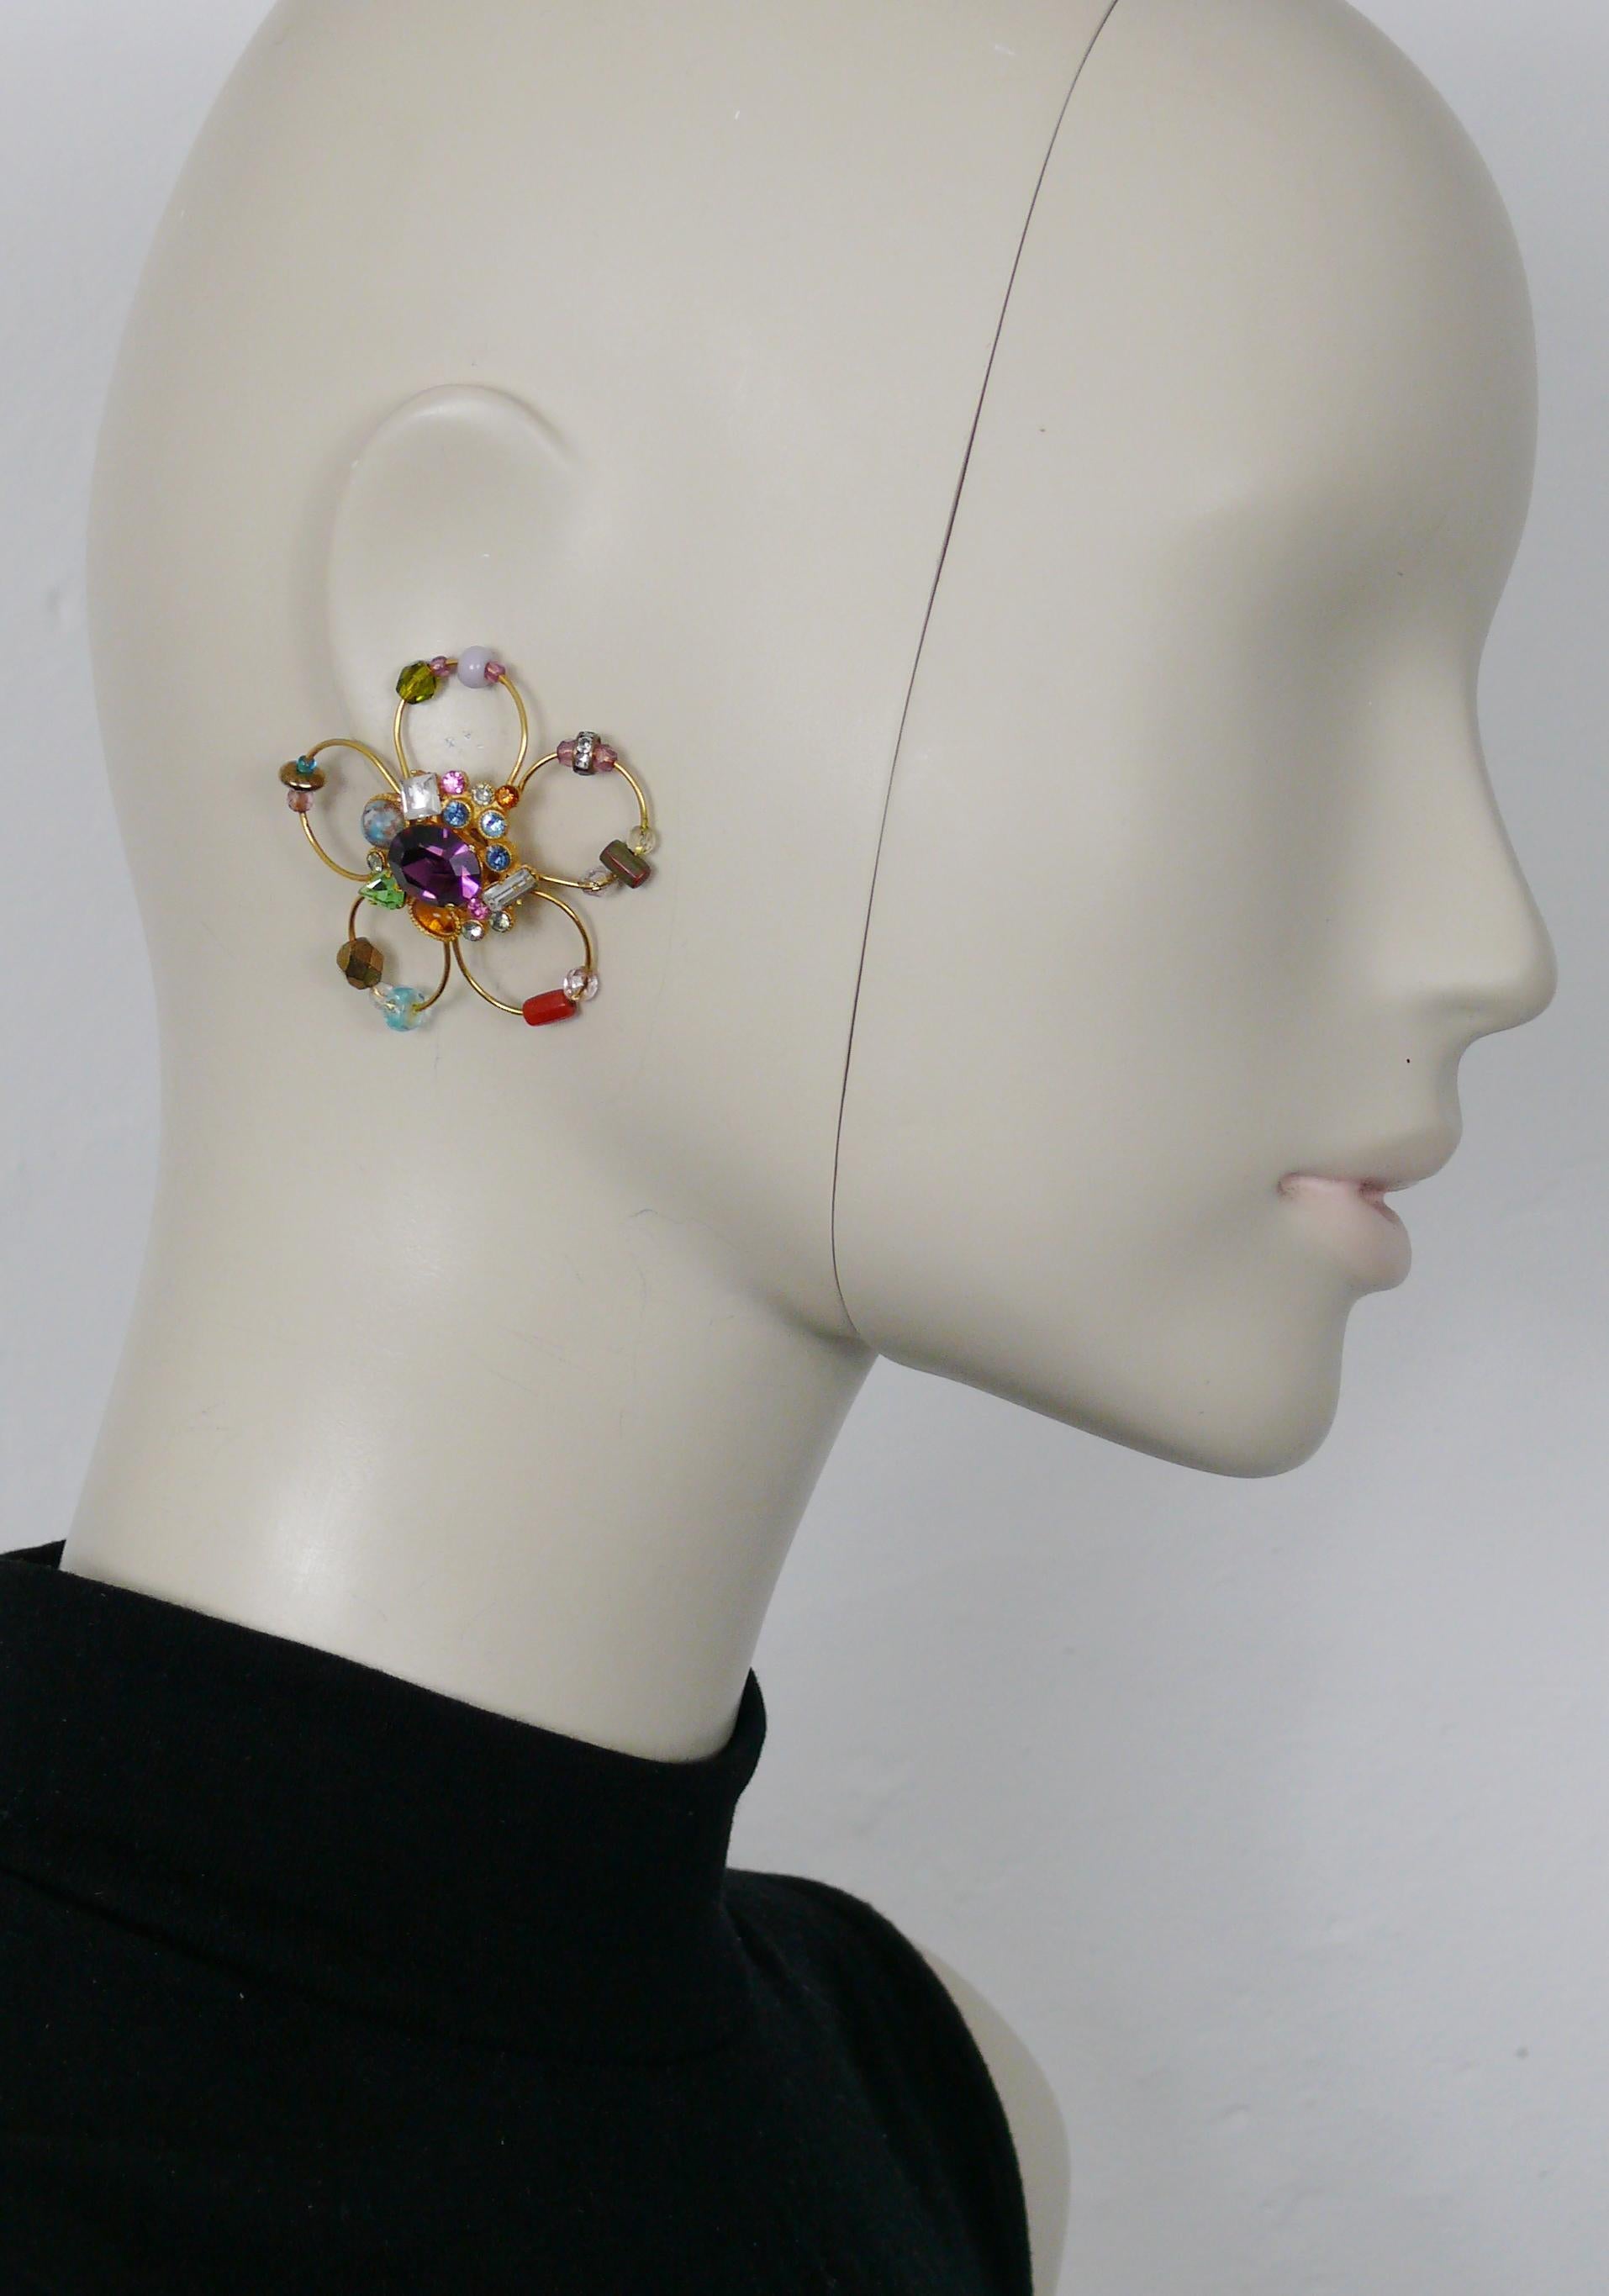 CHRISTIAN LACROIX vintage gold toned twisted wire flower design clip-on earrings embellished with multicolored crystals, resin cabochons and beads.

Embossed CHRISTIAN LACROIX CL Made in France.

Indicative measurements : approx. 5 cm x 4.5 cm (1.97